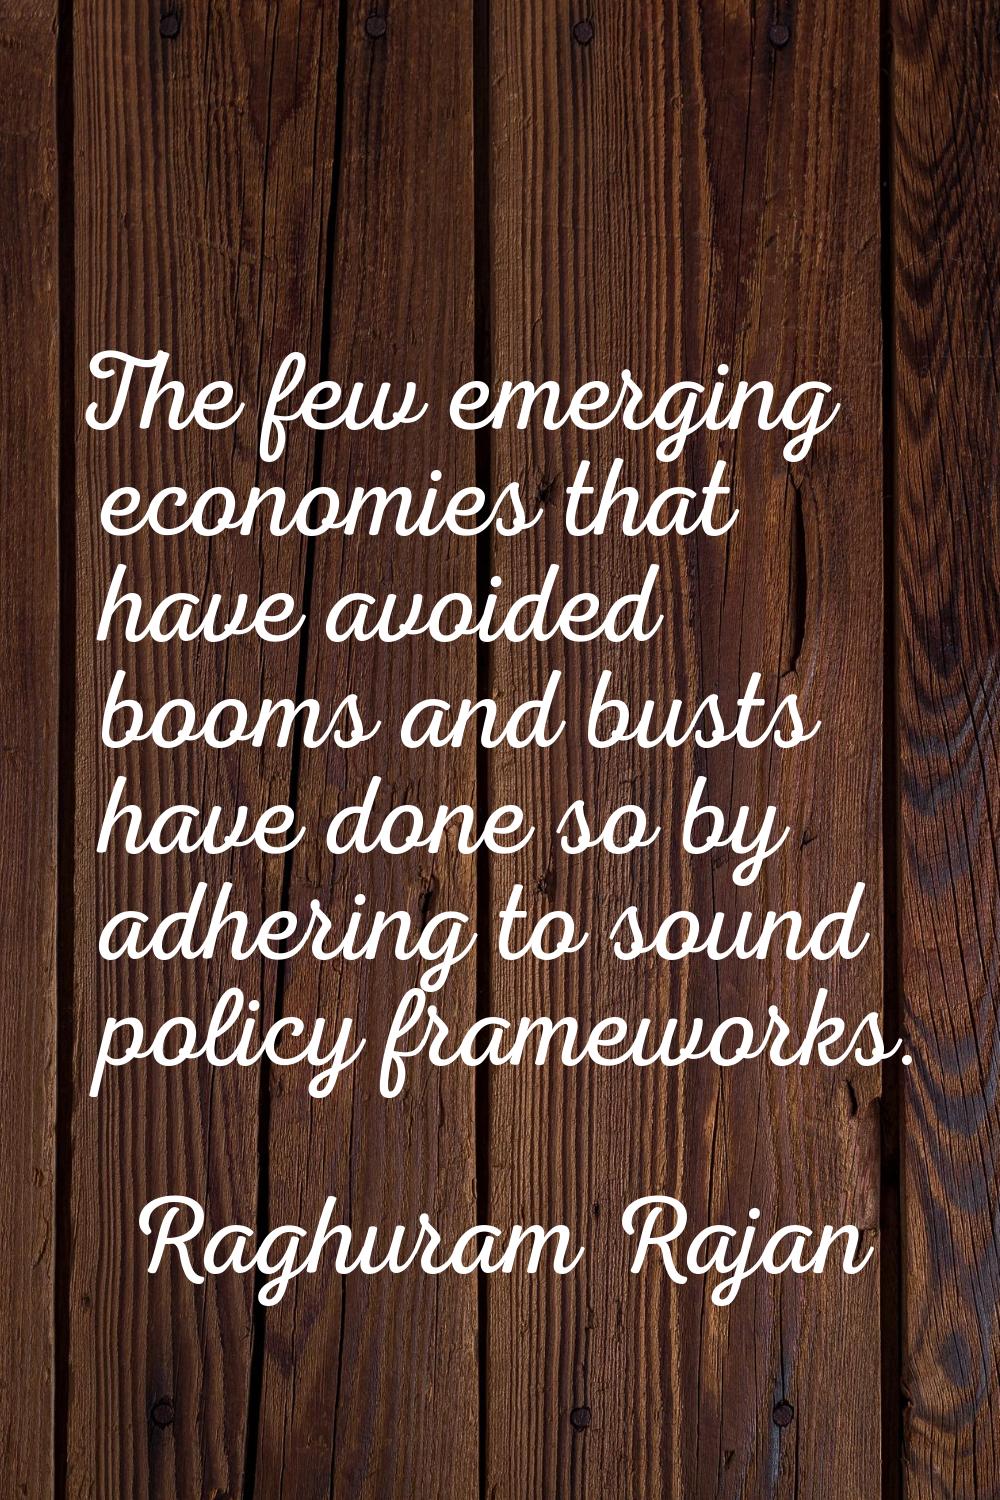 The few emerging economies that have avoided booms and busts have done so by adhering to sound poli